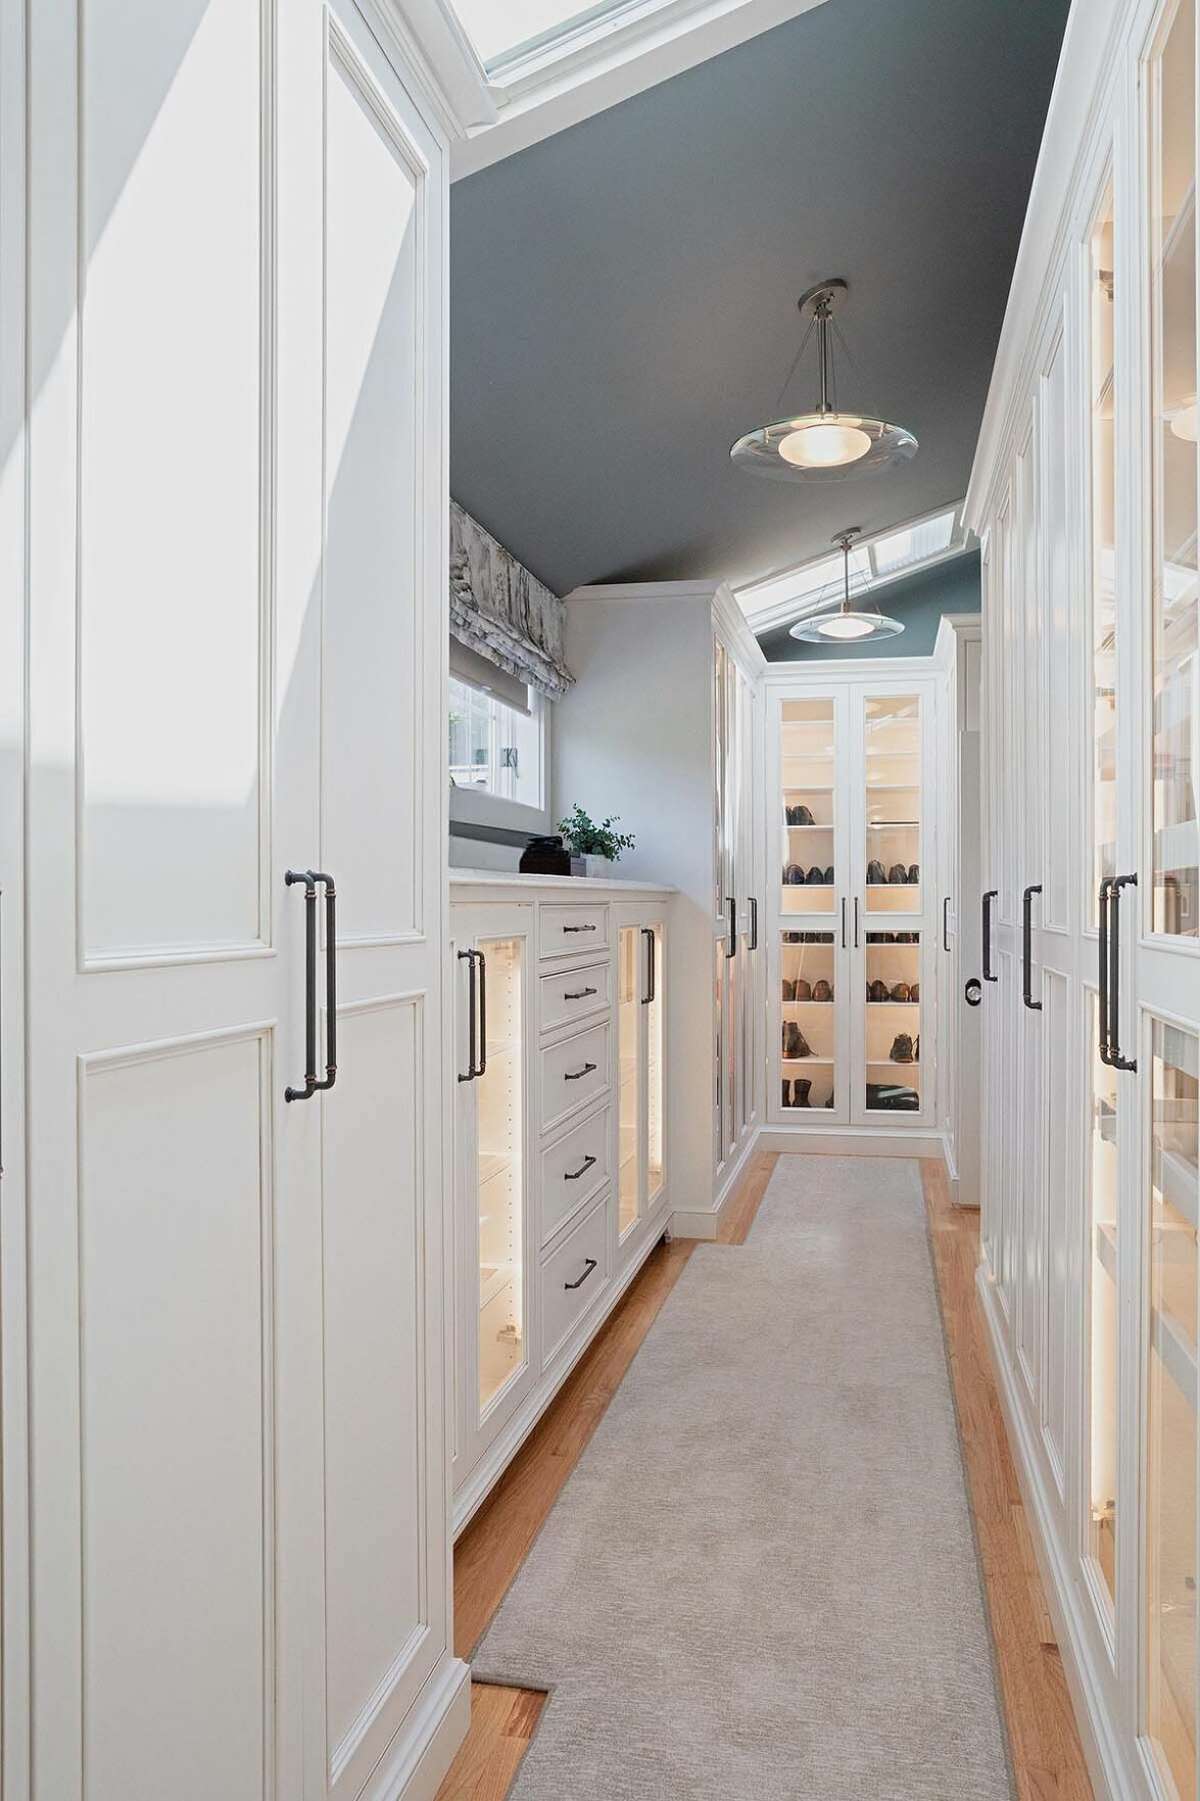 Substantial structural changes went into expanding the master closet. Lighting behind glass cabinet doors makes it easy to find the perfect outfit or pair of shoes, while skylights add natural light.